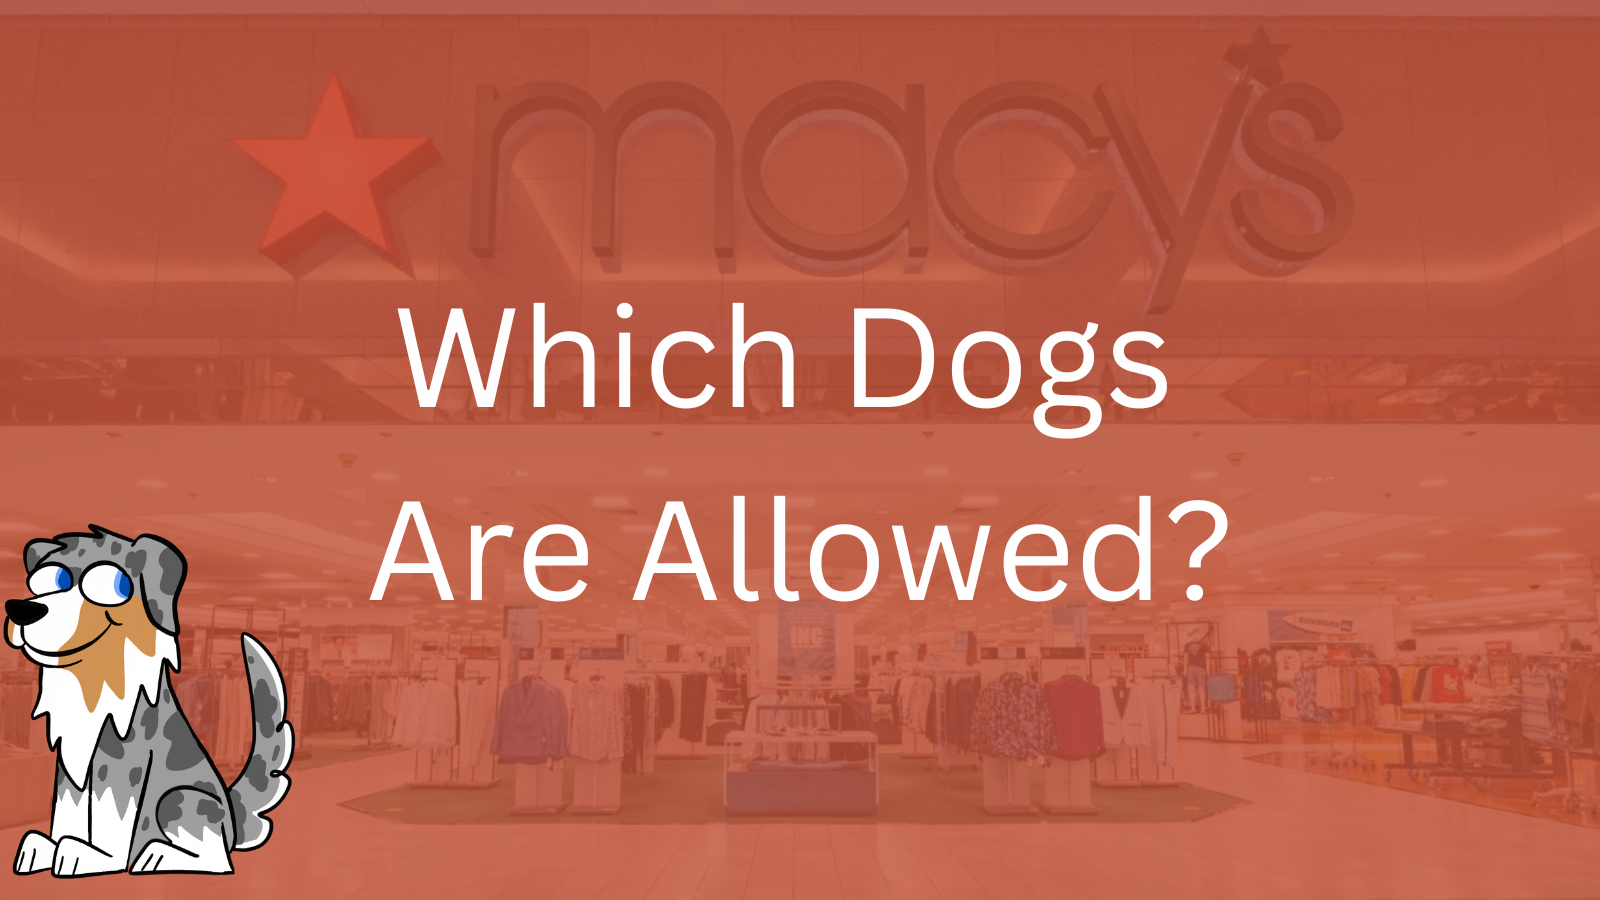 Image Text: "Which Dogs Are Allowed?"